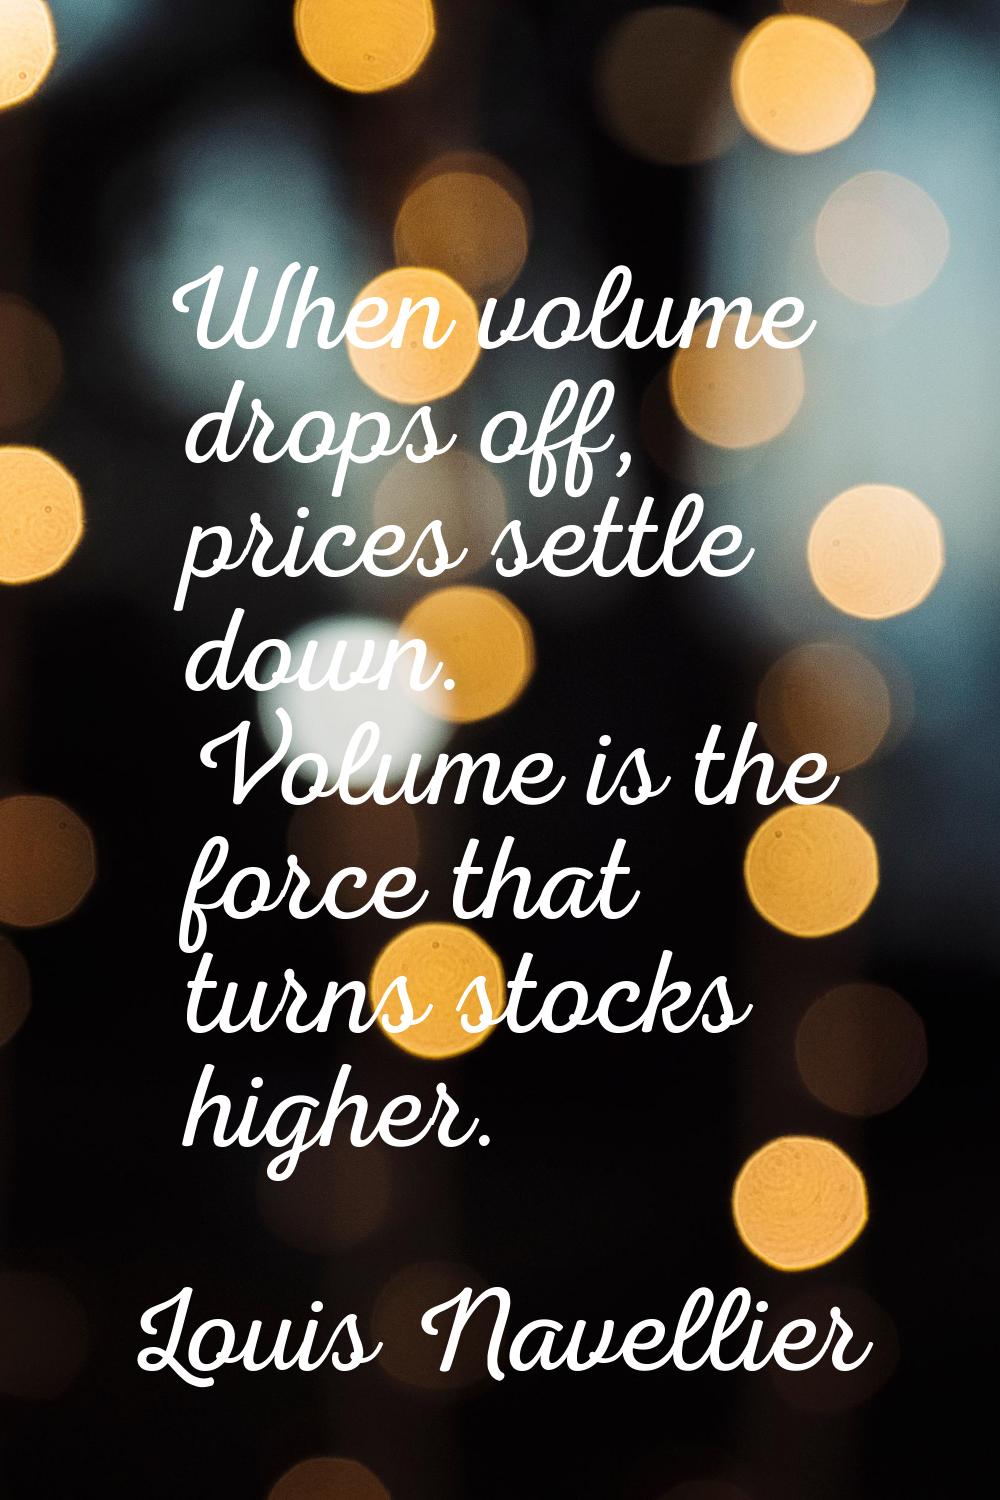 When volume drops off, prices settle down. Volume is the force that turns stocks higher.